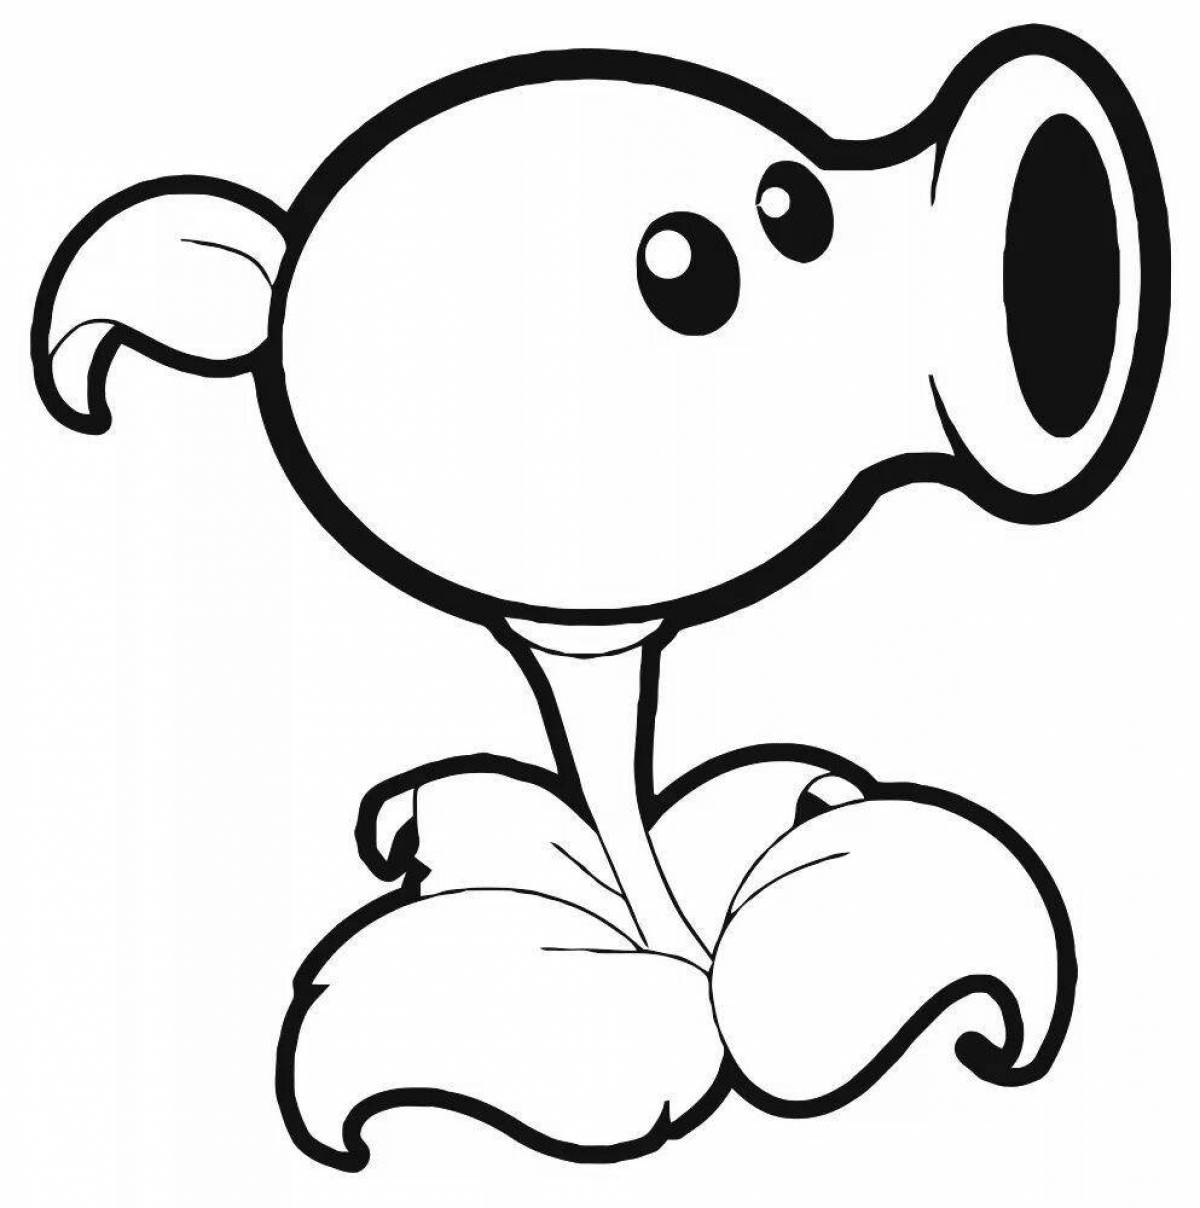 Animated pea shooter coloring page